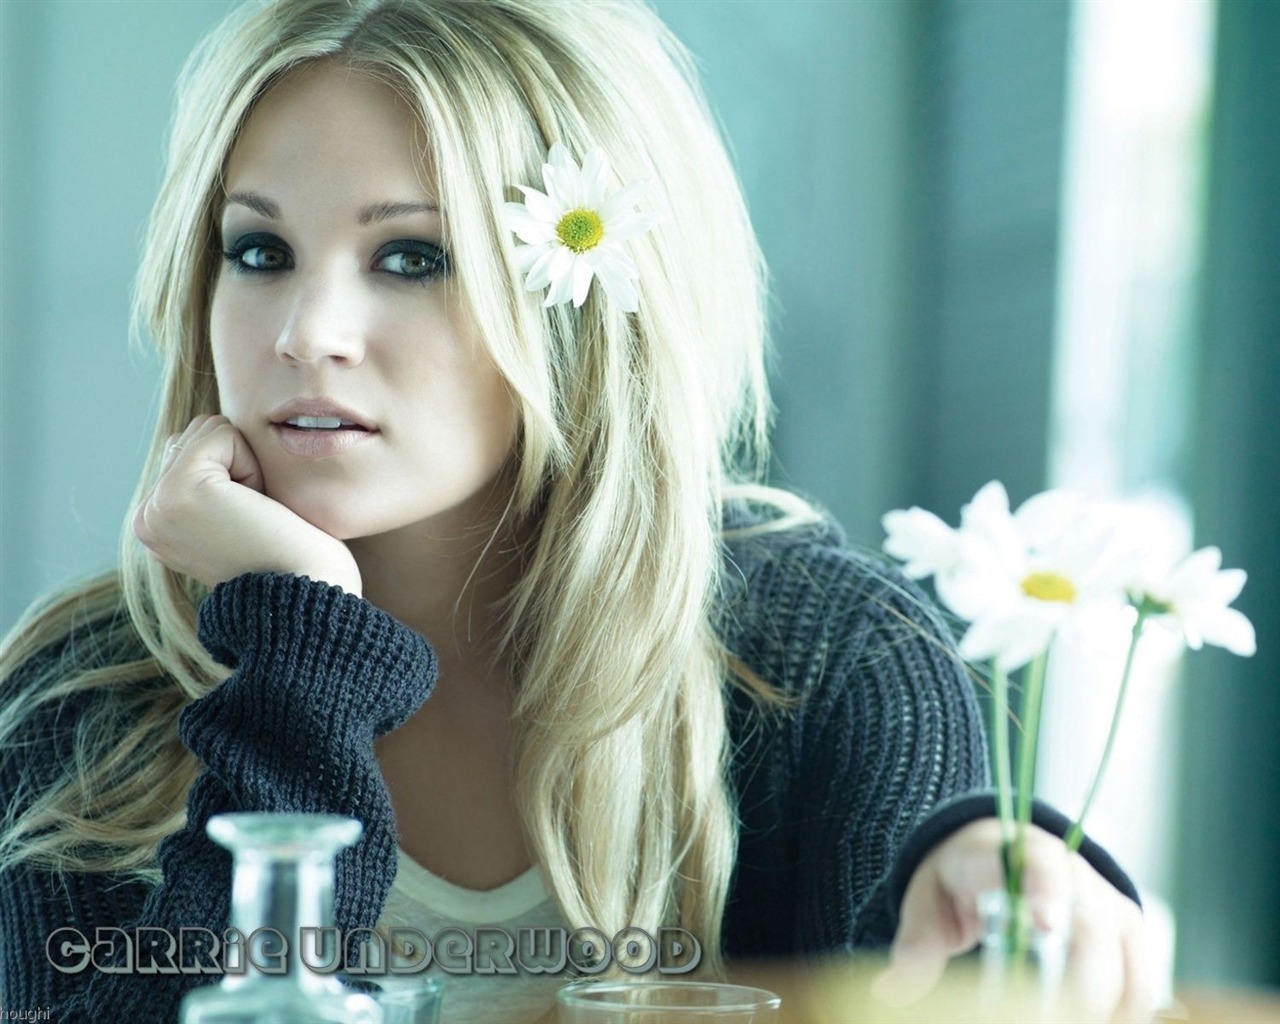 Carrie Underwood #007 - 1280x1024 Wallpapers Pictures Photos Images